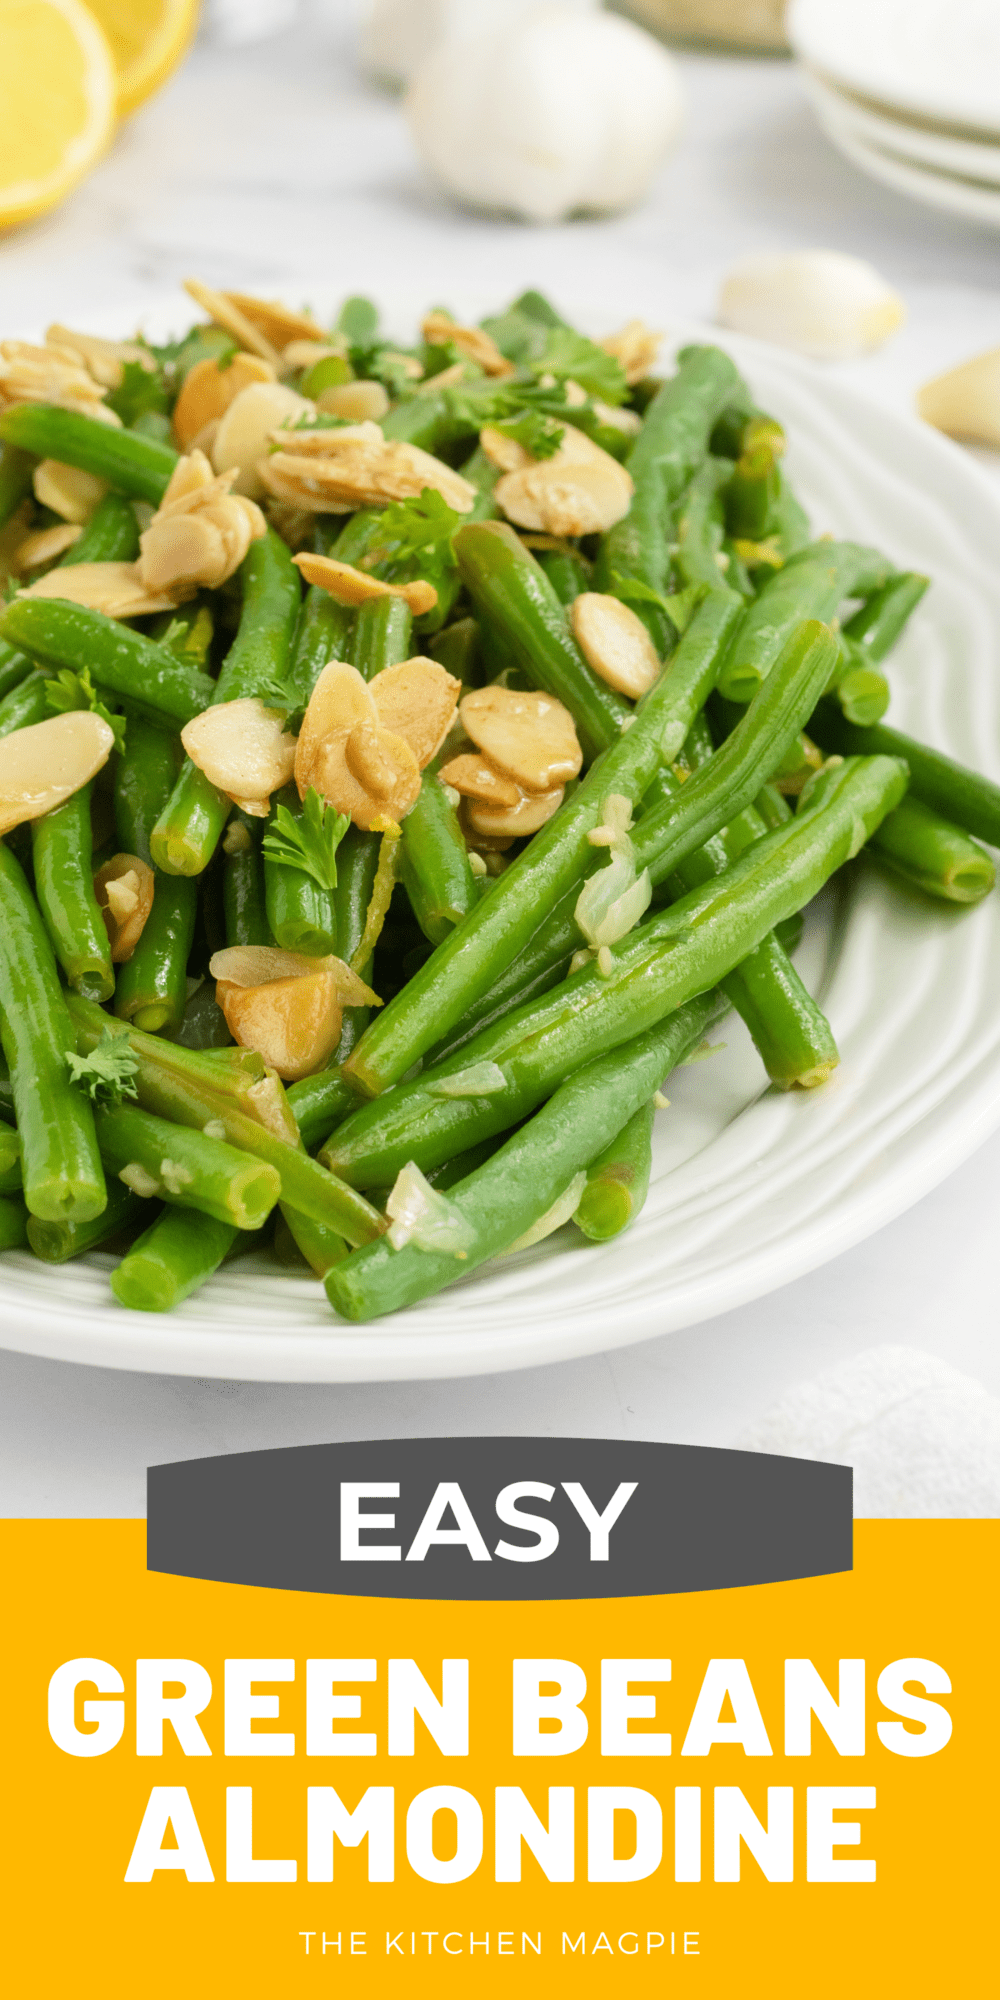 Green beans almondine is a mainstay of holiday dishes. Every home cook needs to have this recipe in their back pocket for big family meals.